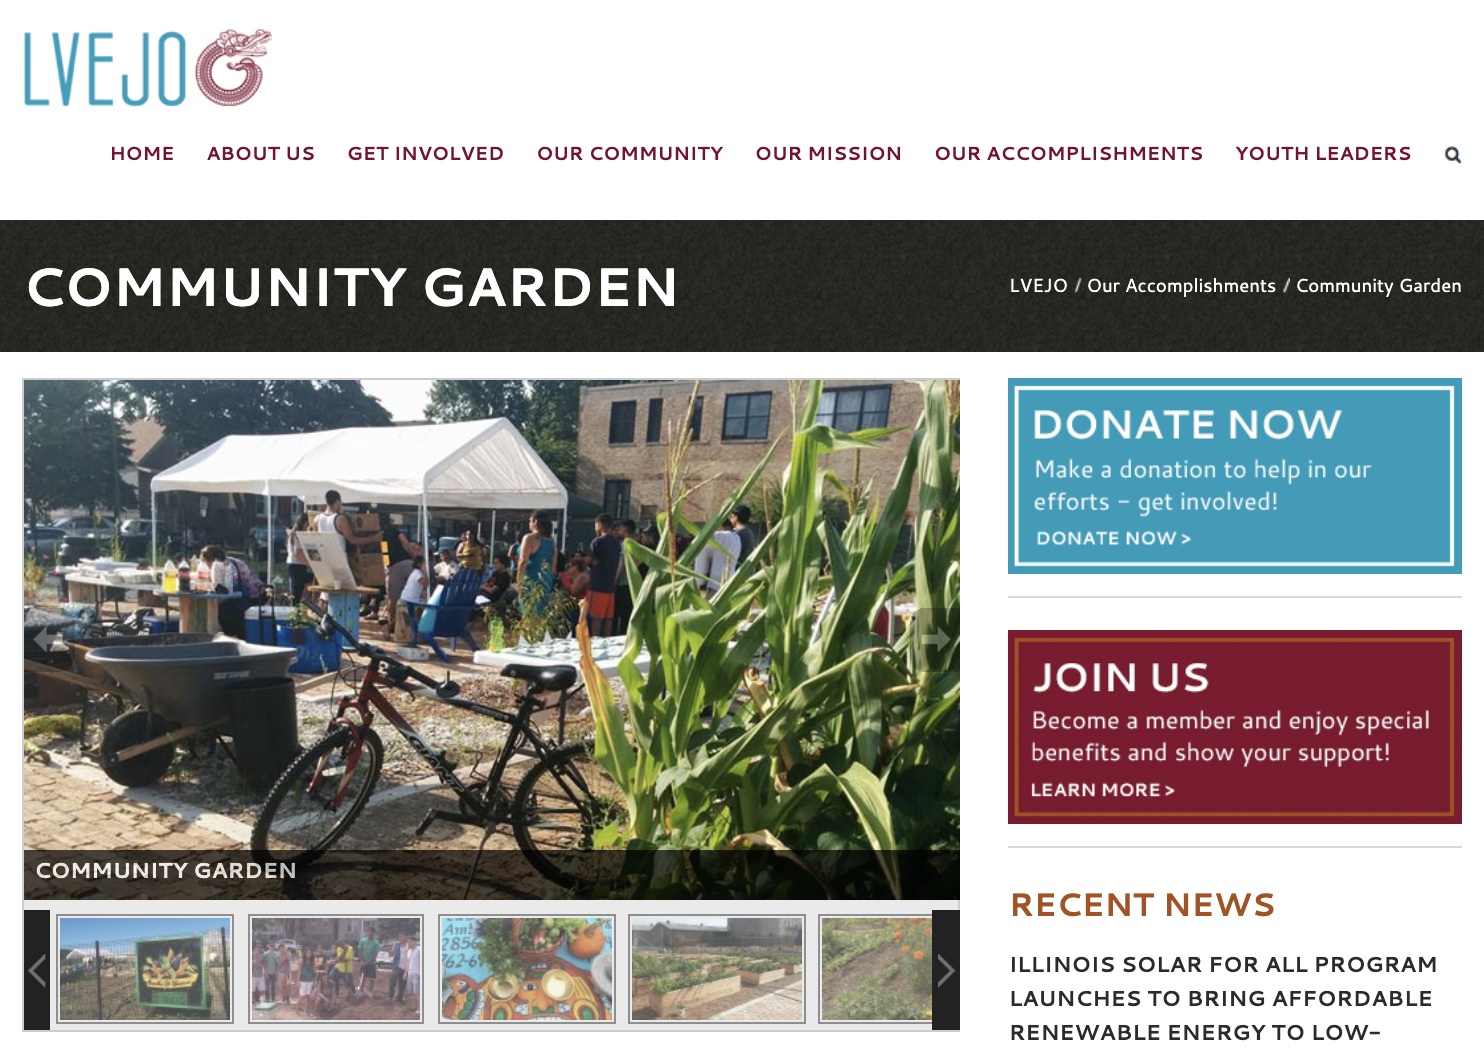 A screen shot of the “Community Garden” section of the LVEJO website.